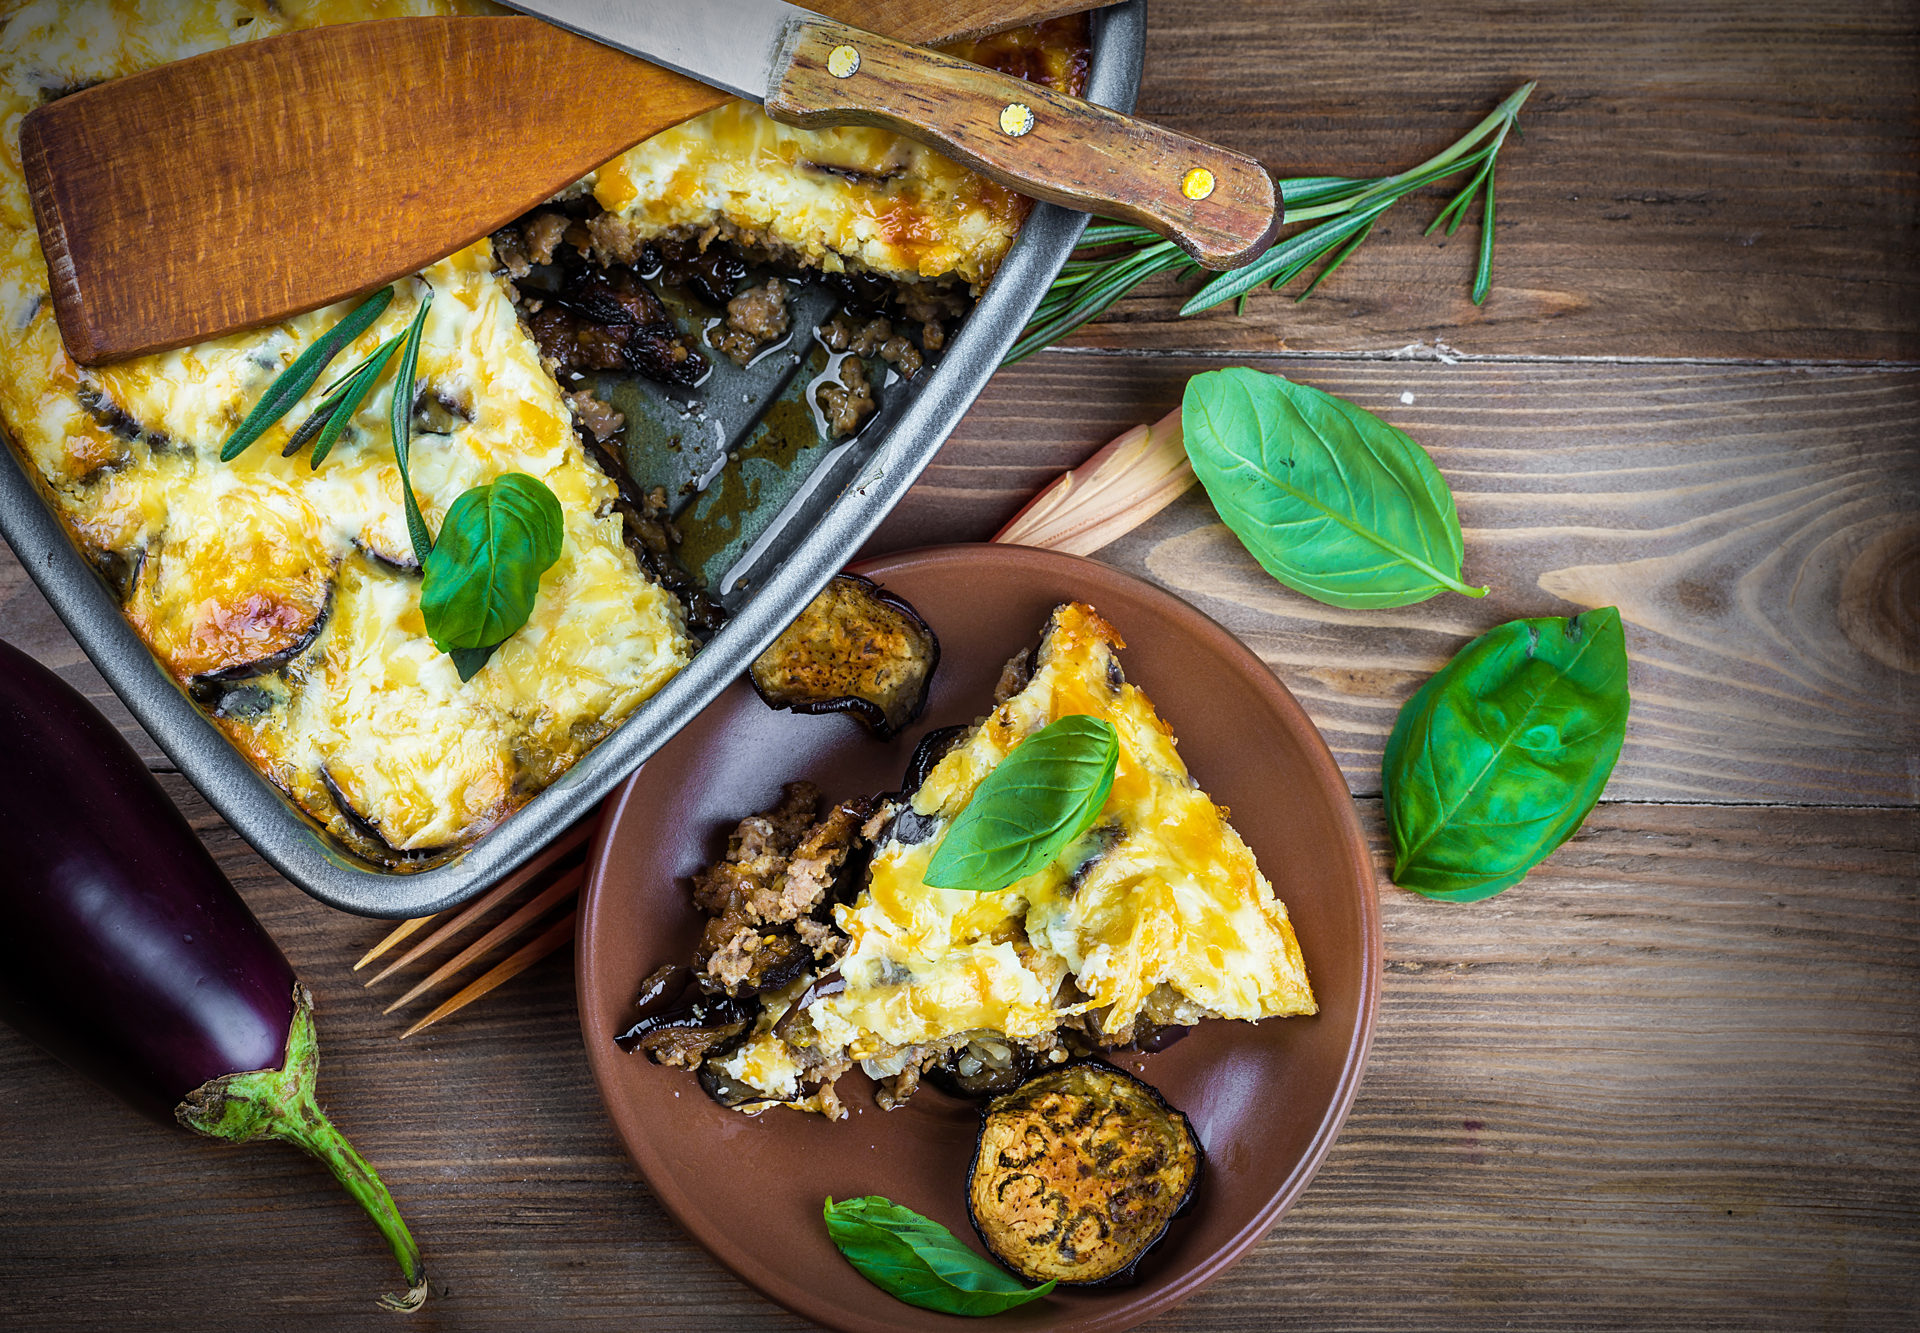 Greek Moussaka of eggplant and minced meat